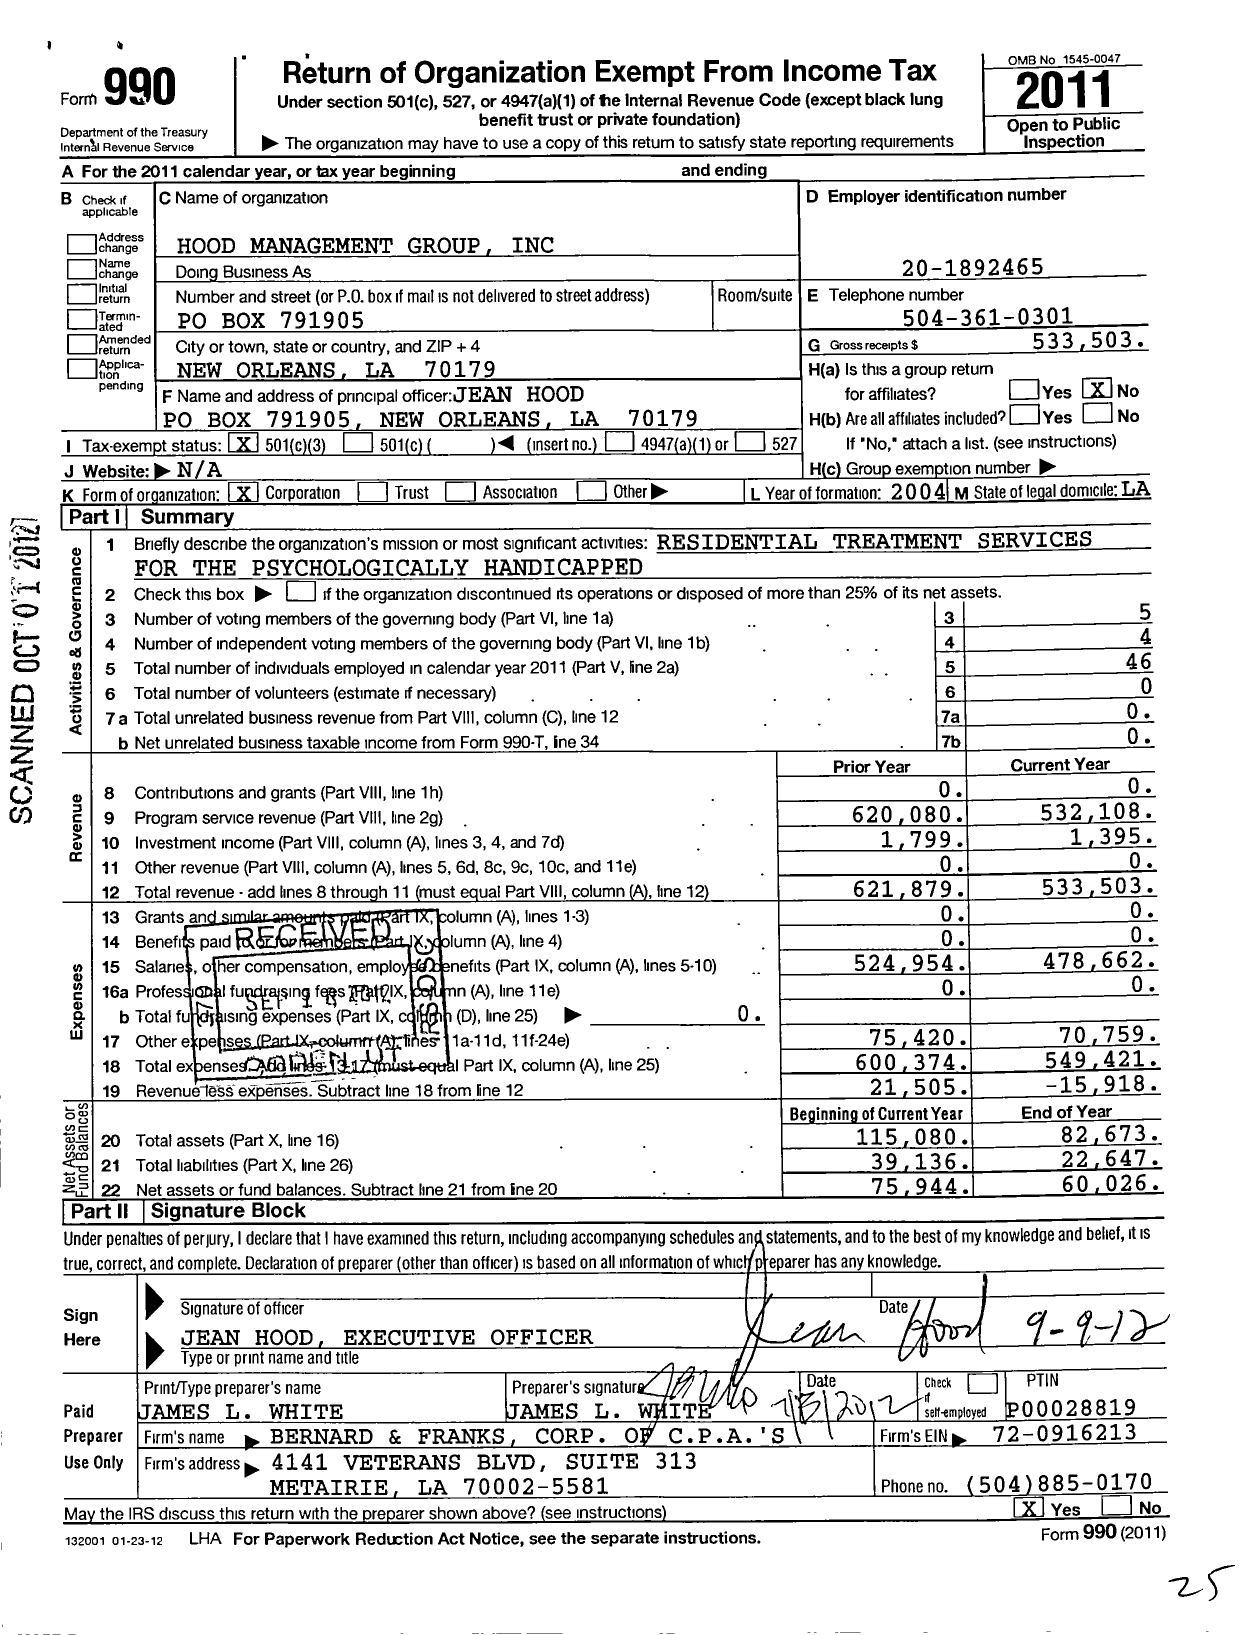 Image of first page of 2011 Form 990 for Hood Management Group